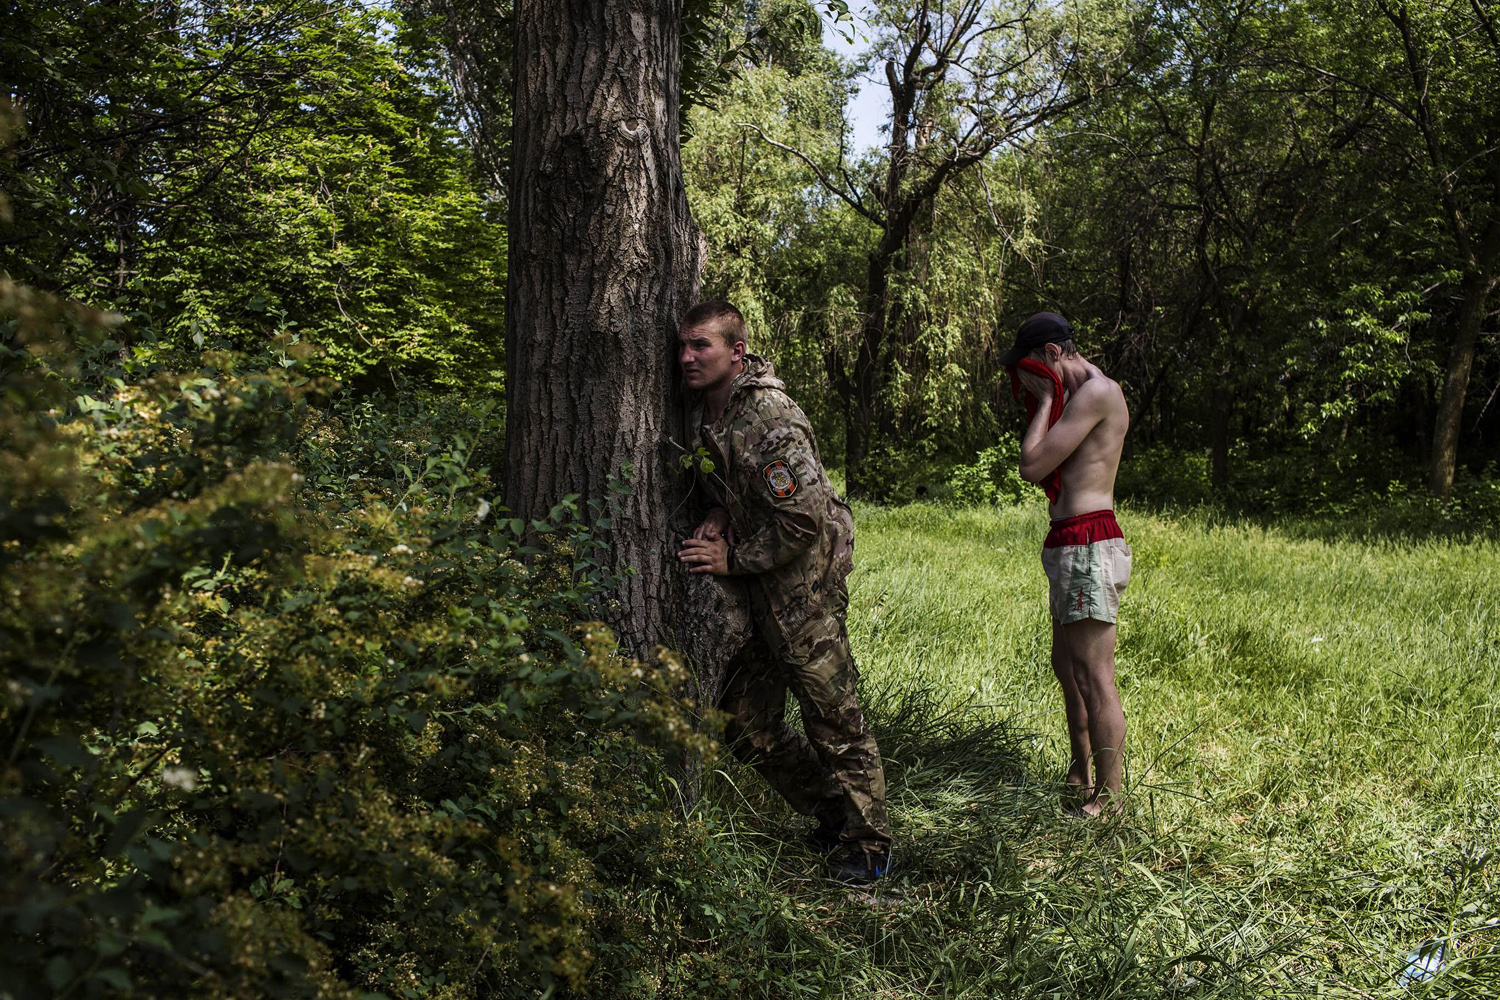 May 26, 2014. A pro-Russian fighter (L) takes position behind a tree during clashes against Ukrainian forces near the airport in Donetsk.